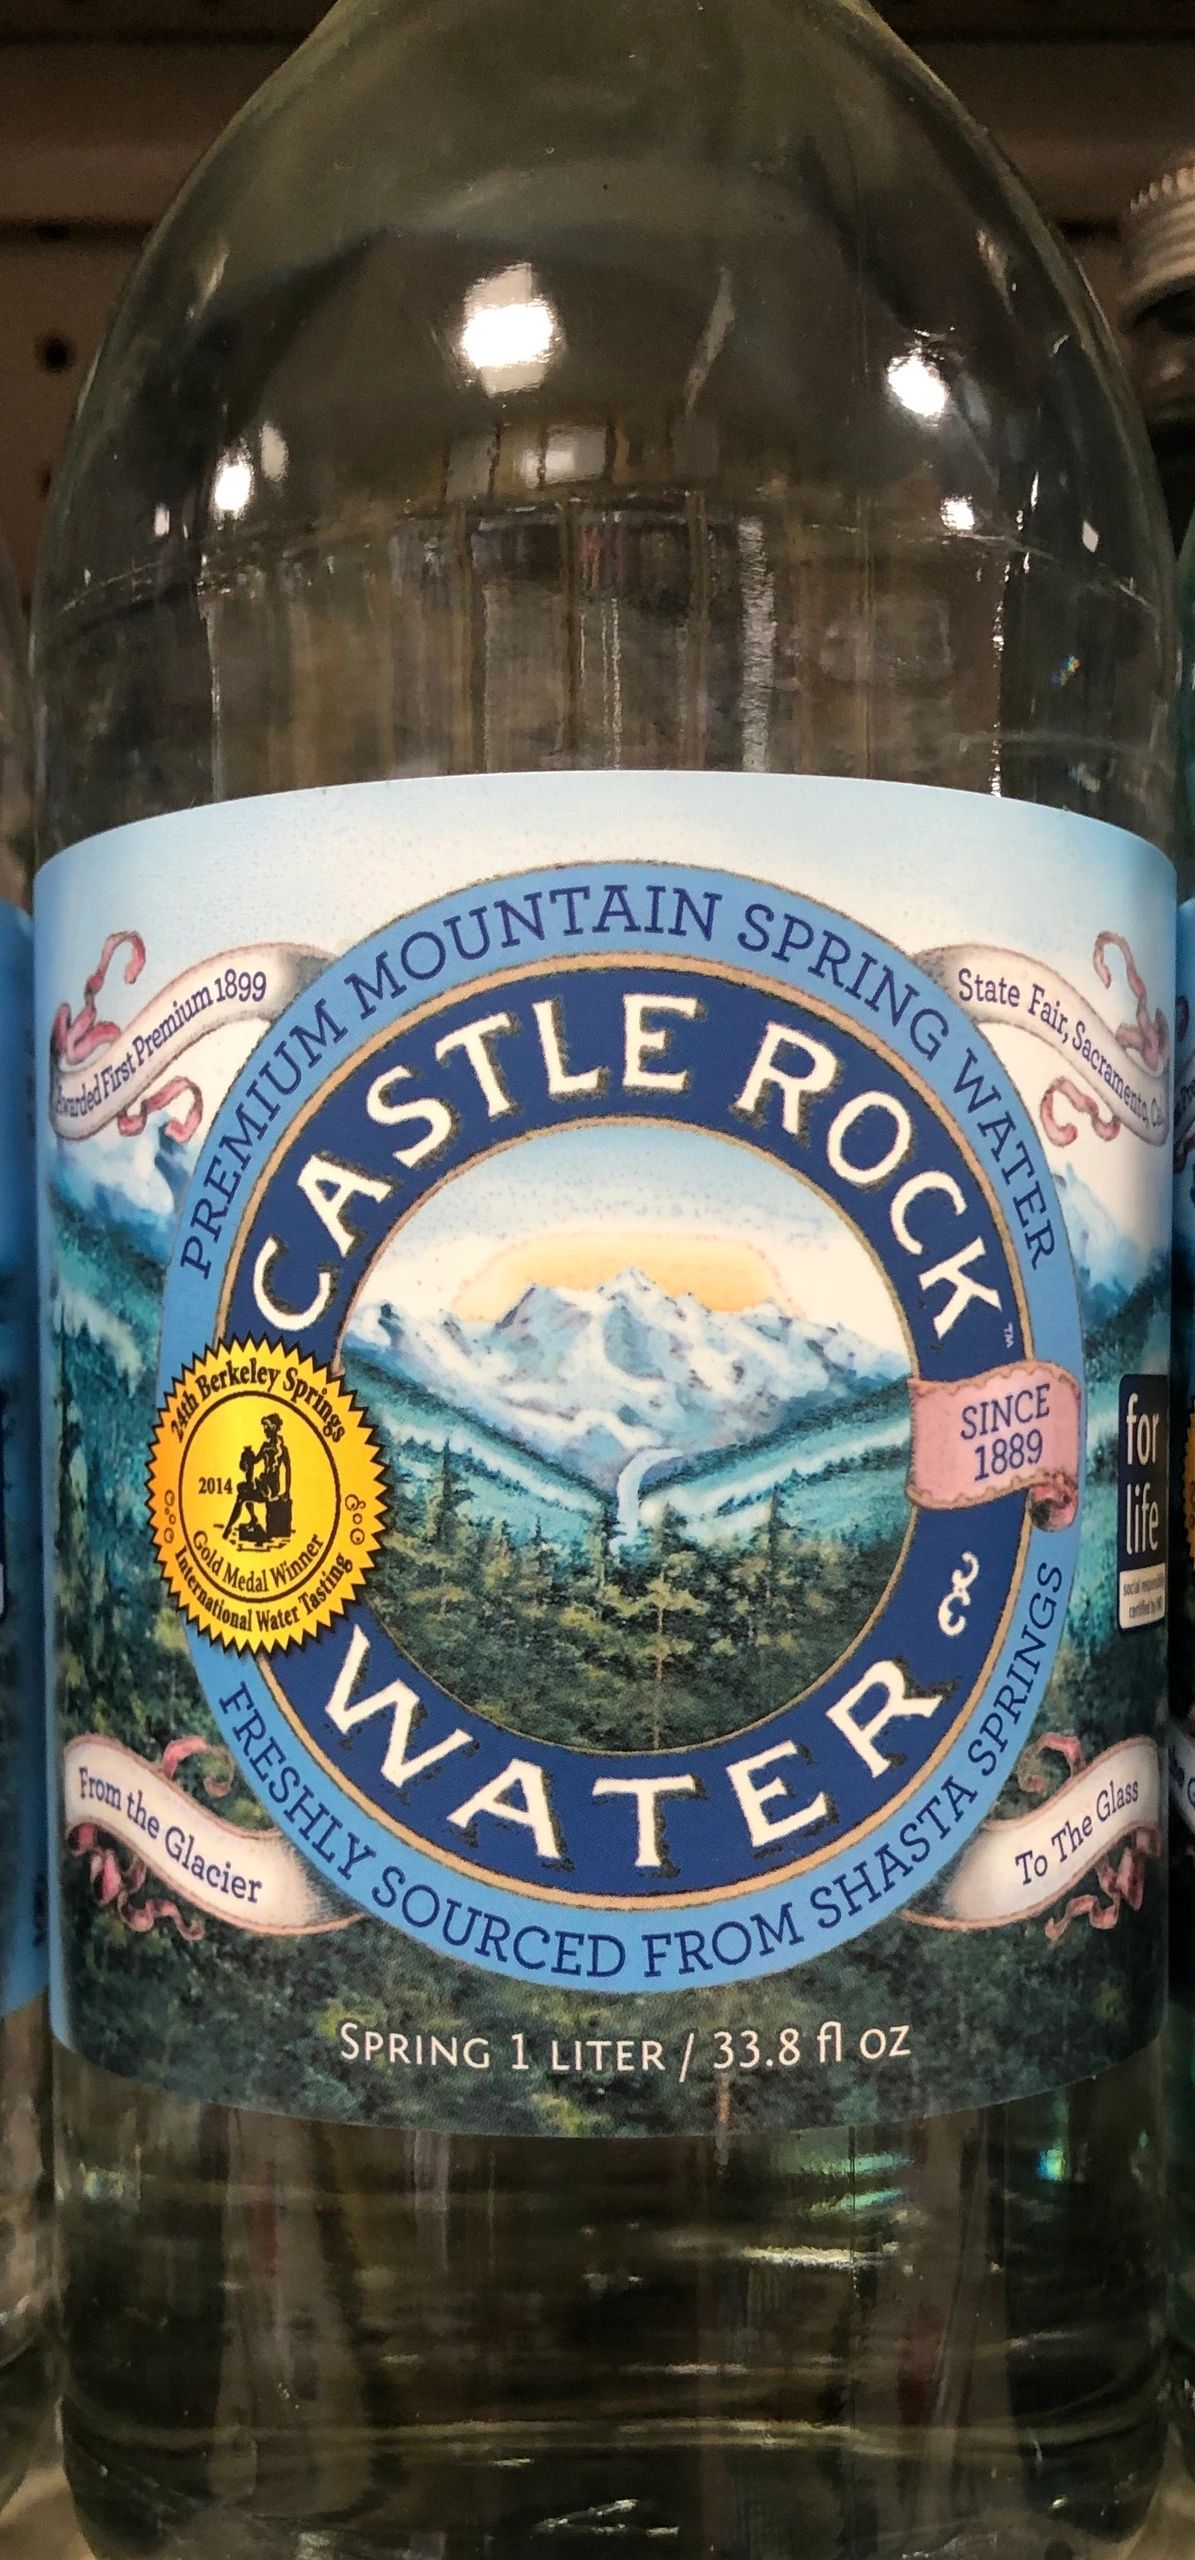 What's the BEST BOTTLED WATER? Here's What the Rock WON'T Tell You! - Water  eStore CA